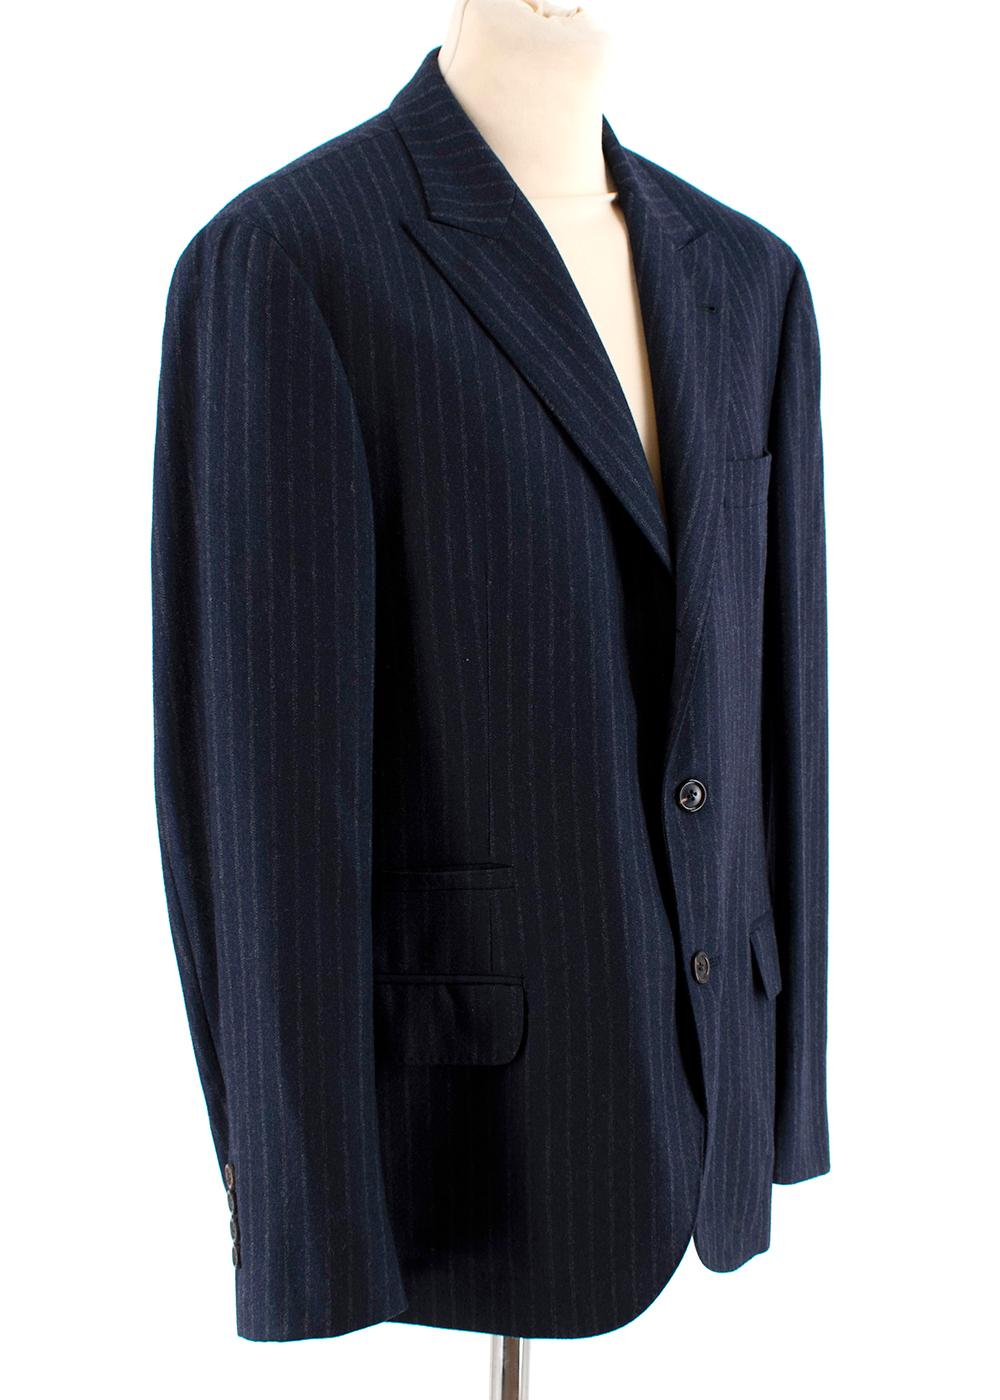 Brunello Cucinelli Mens Navy Pin Striped Blazer

- Vertical pin striped weave
- Mid weight material
- Brown silk lining
- Semi padded shoulders
- Flap pockets on both sides
- Single breasted with 2 larger tortoise shell buttons & smaller buttons on